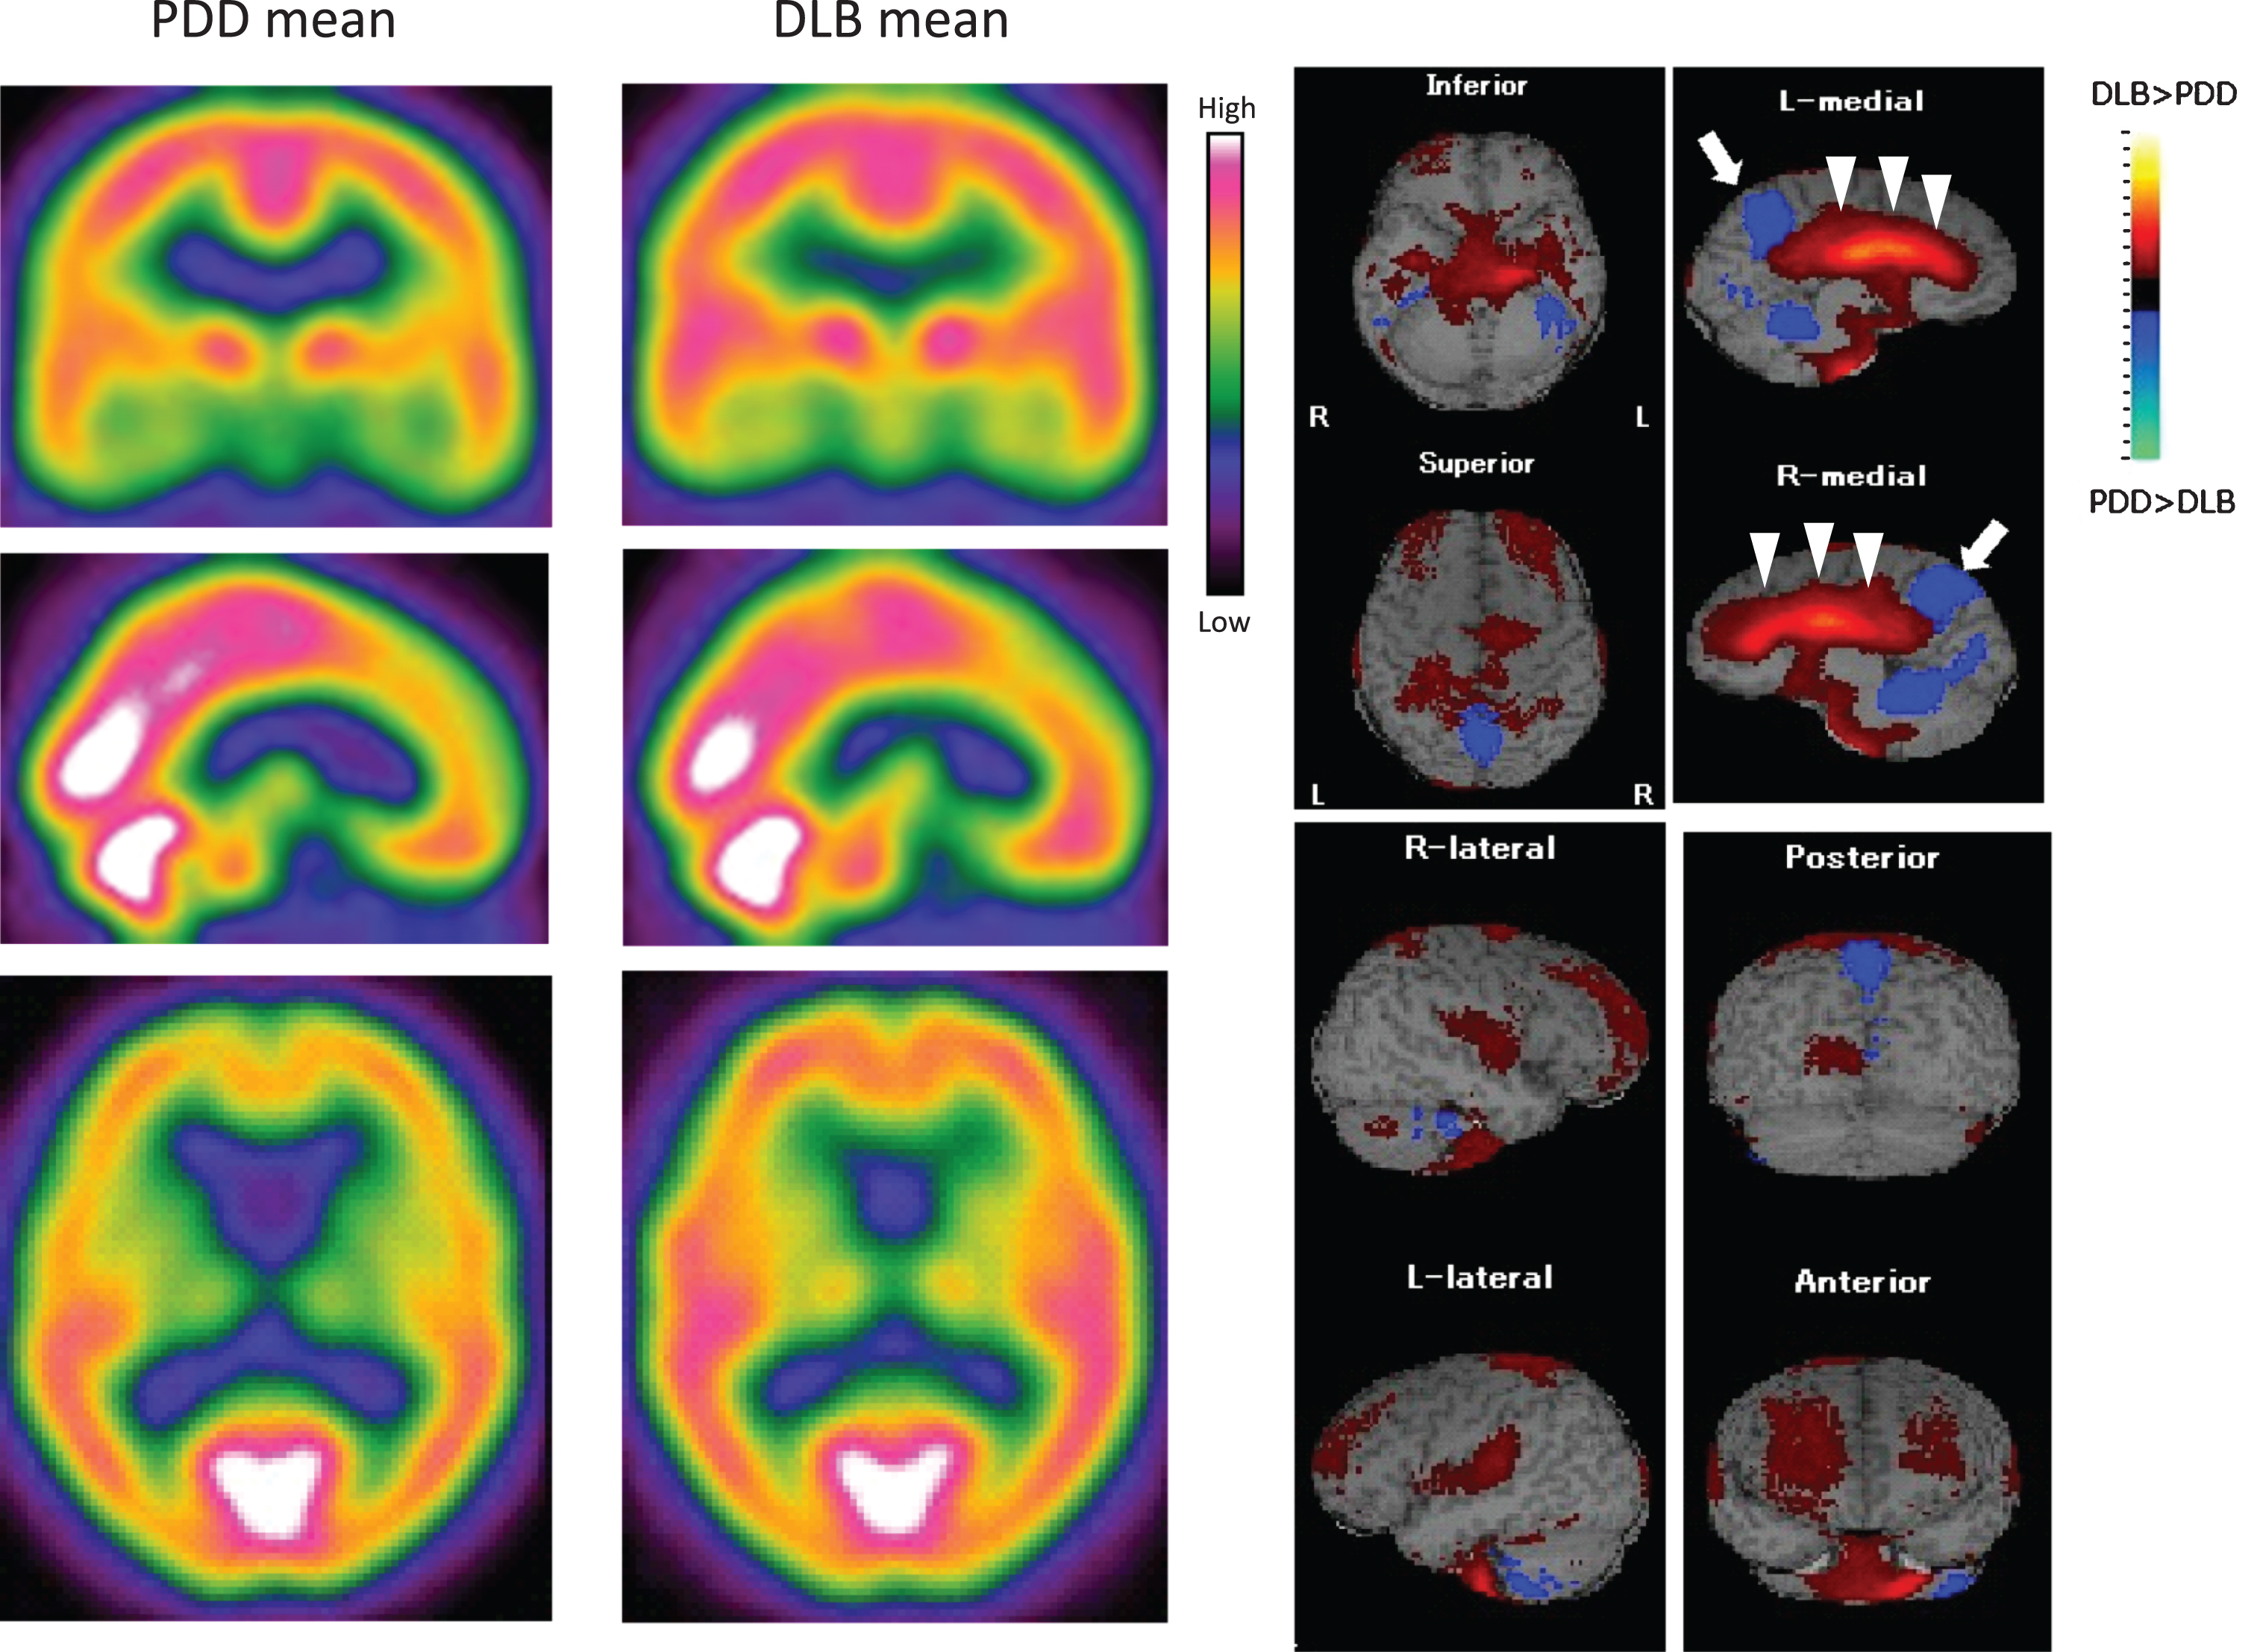 99mTc-ECD SPECT images of the mean values in PDD and DLB patients (left panels). There is a slight decrease of CBF in the frontal lobe in PDD, but similar CBF levels in the posterior lobes of both PDD and DLB. Subtraction image of mean PDD –mean DLB (right panels), showing a higher CBF in whole cingulate gyrus in DLB than PDD groups (arrowheads), and a lower CBF in the precuneus area in DLB (arrow) than PDD.